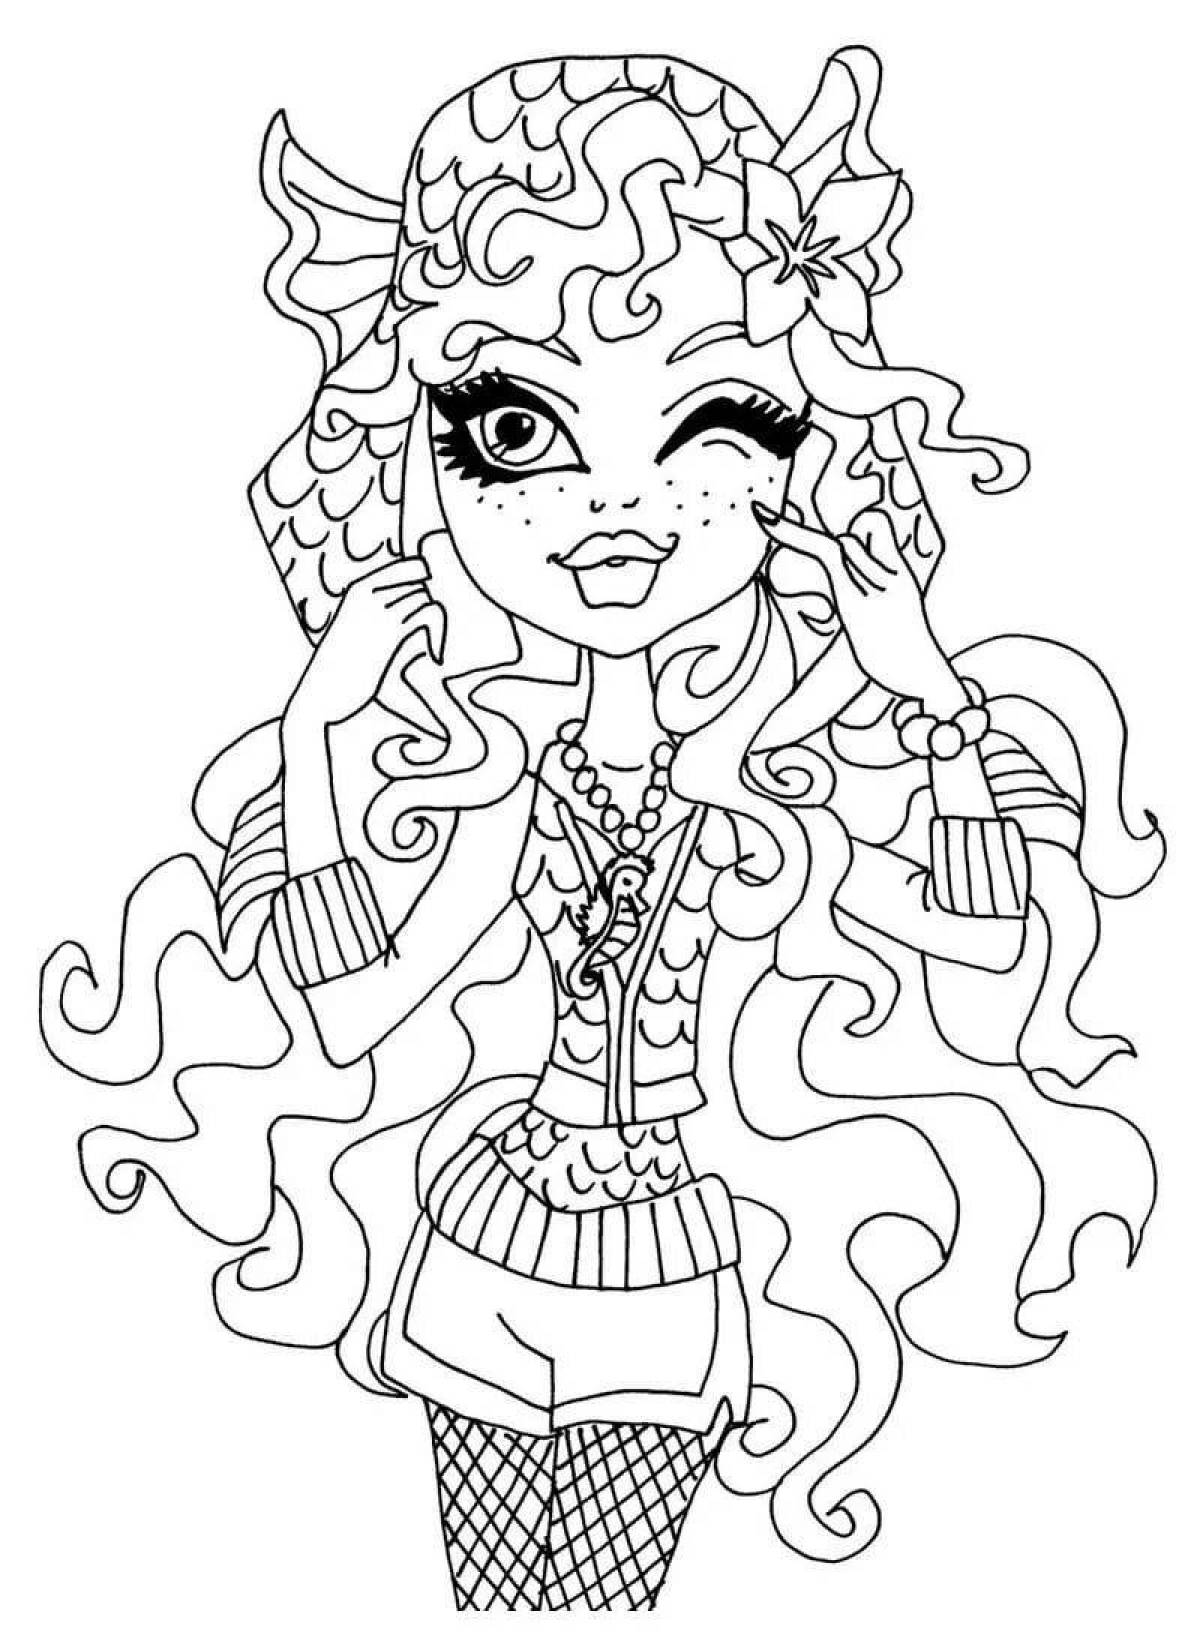 Monster high mystery coloring book for girls